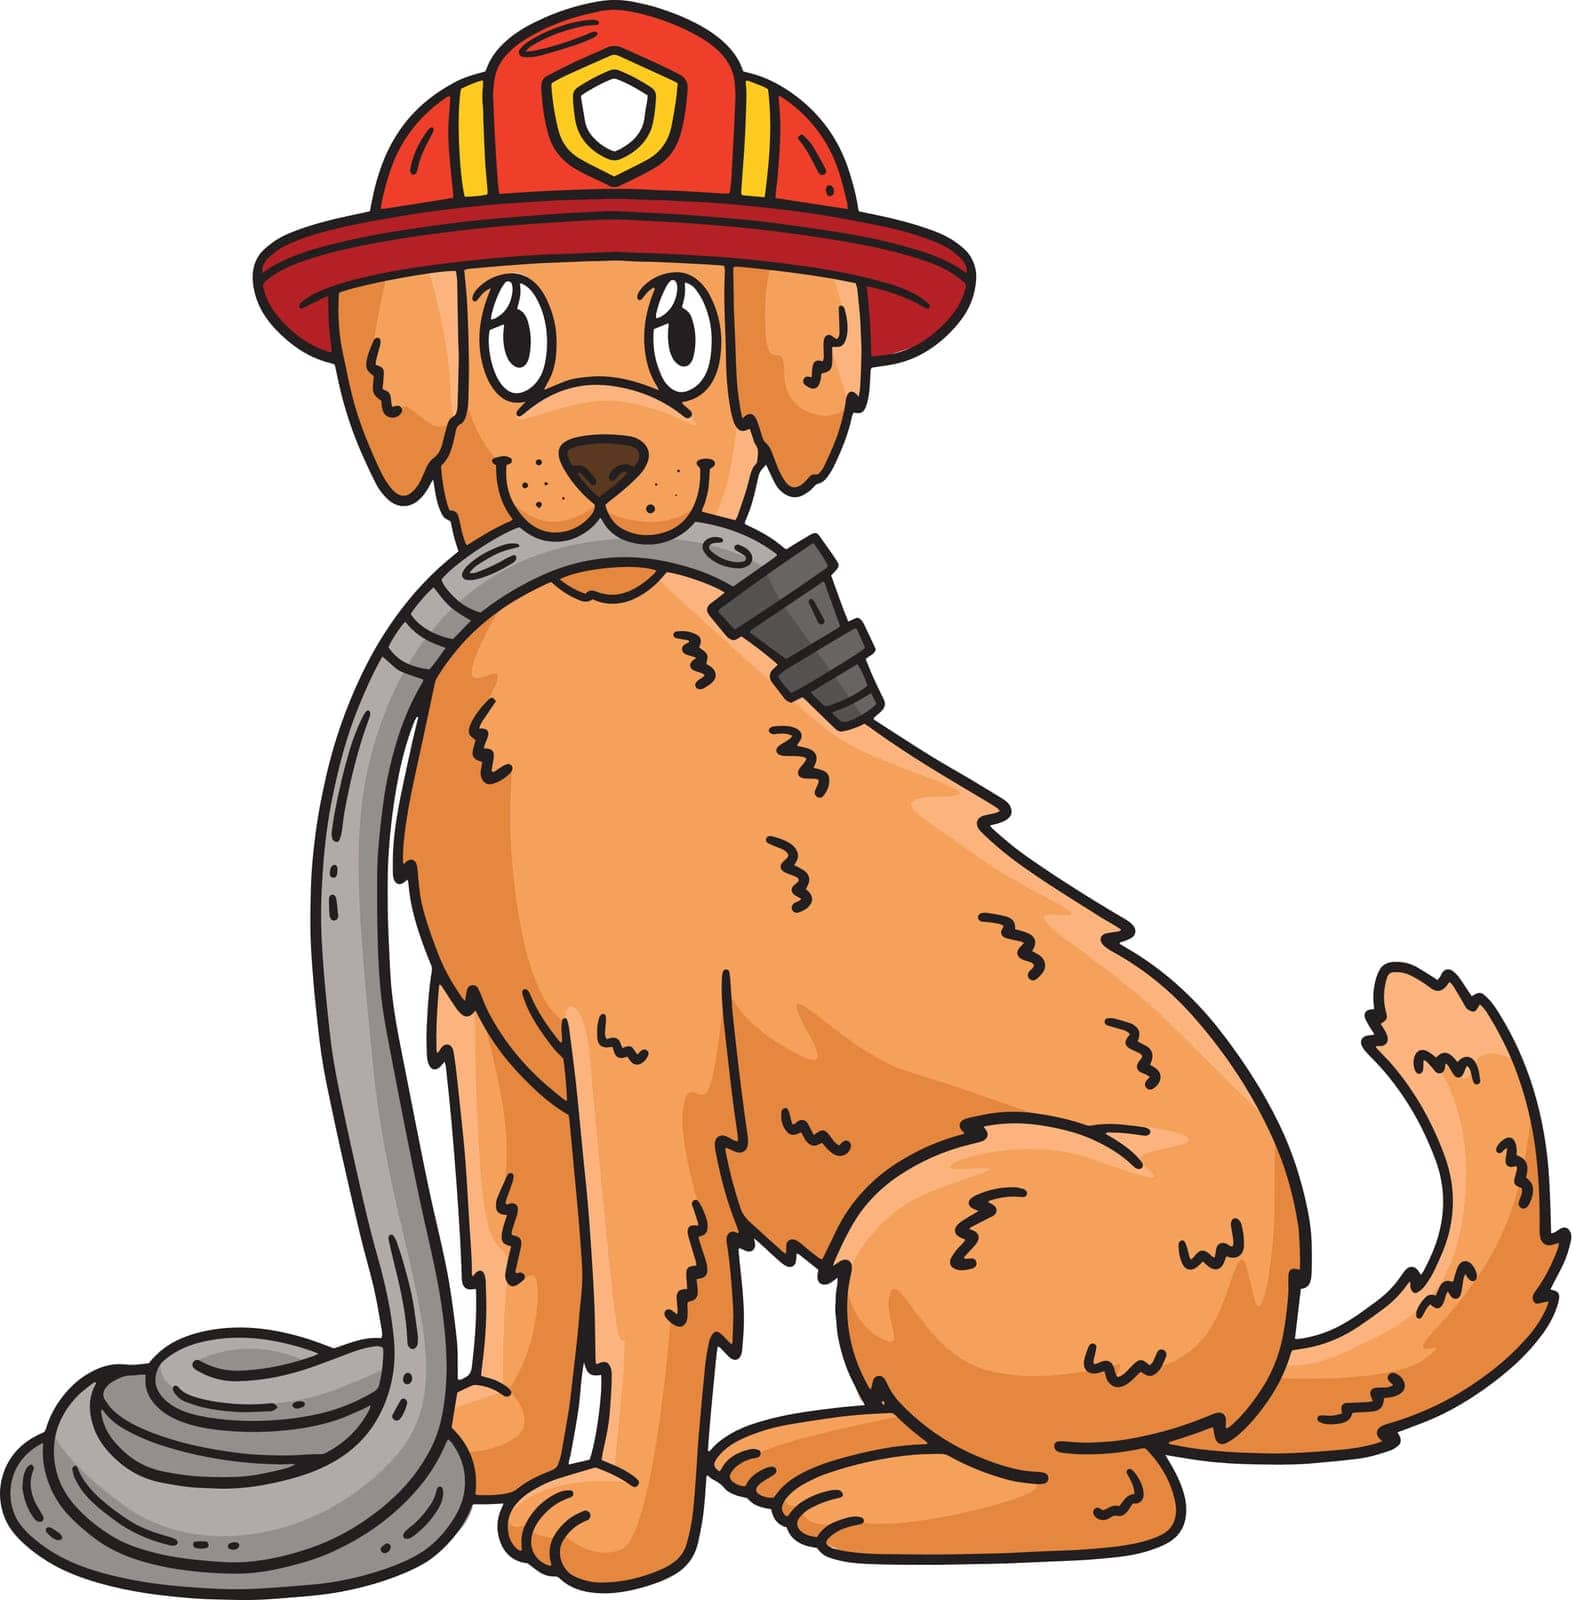 Firefighter Dog Cartoon Colored Clipart by abbydesign